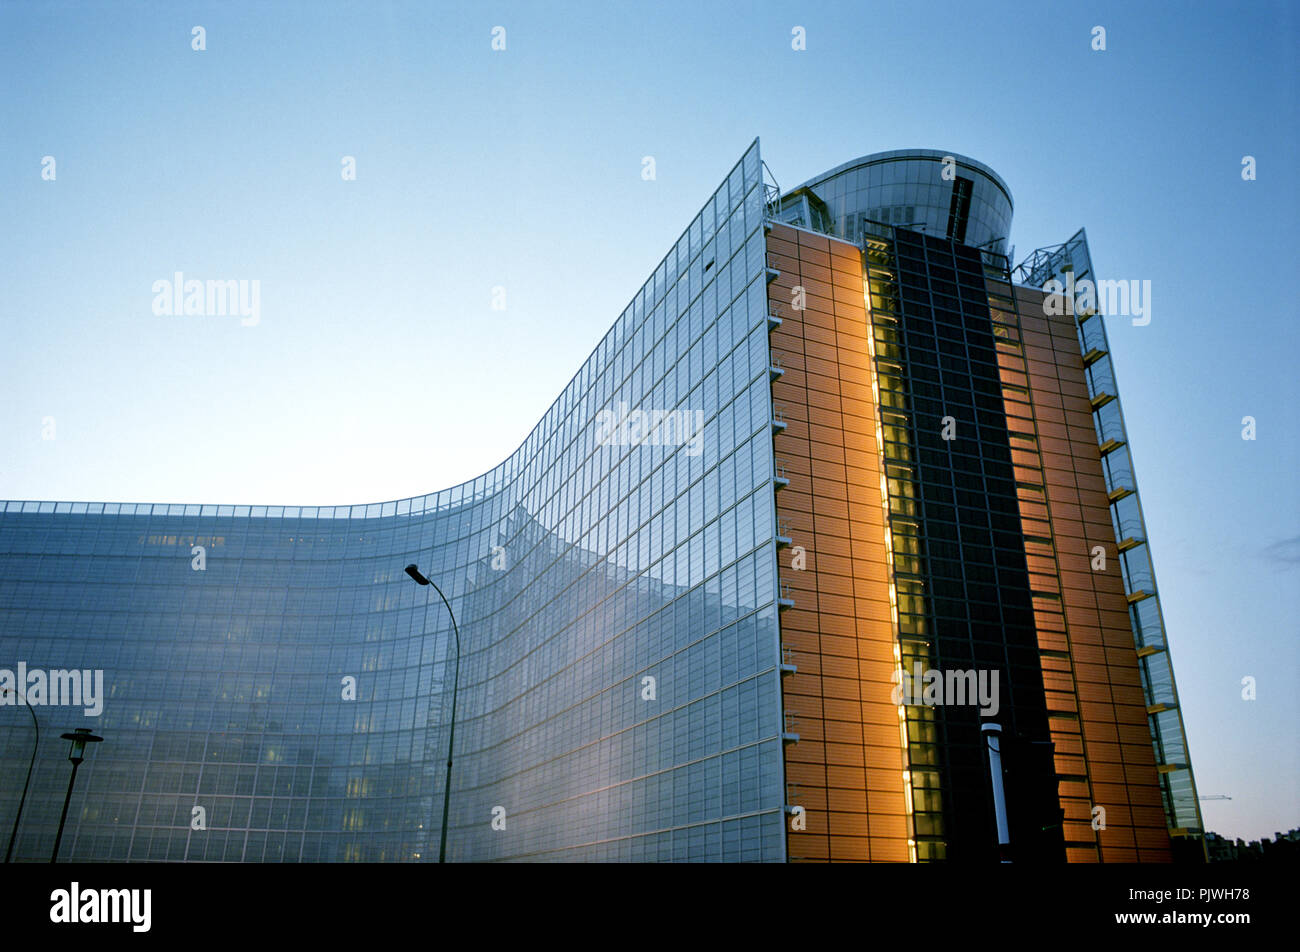 The Berlaymont building of the European Commission in Brussels (Belgium, 23/05/2005) Stock Photo